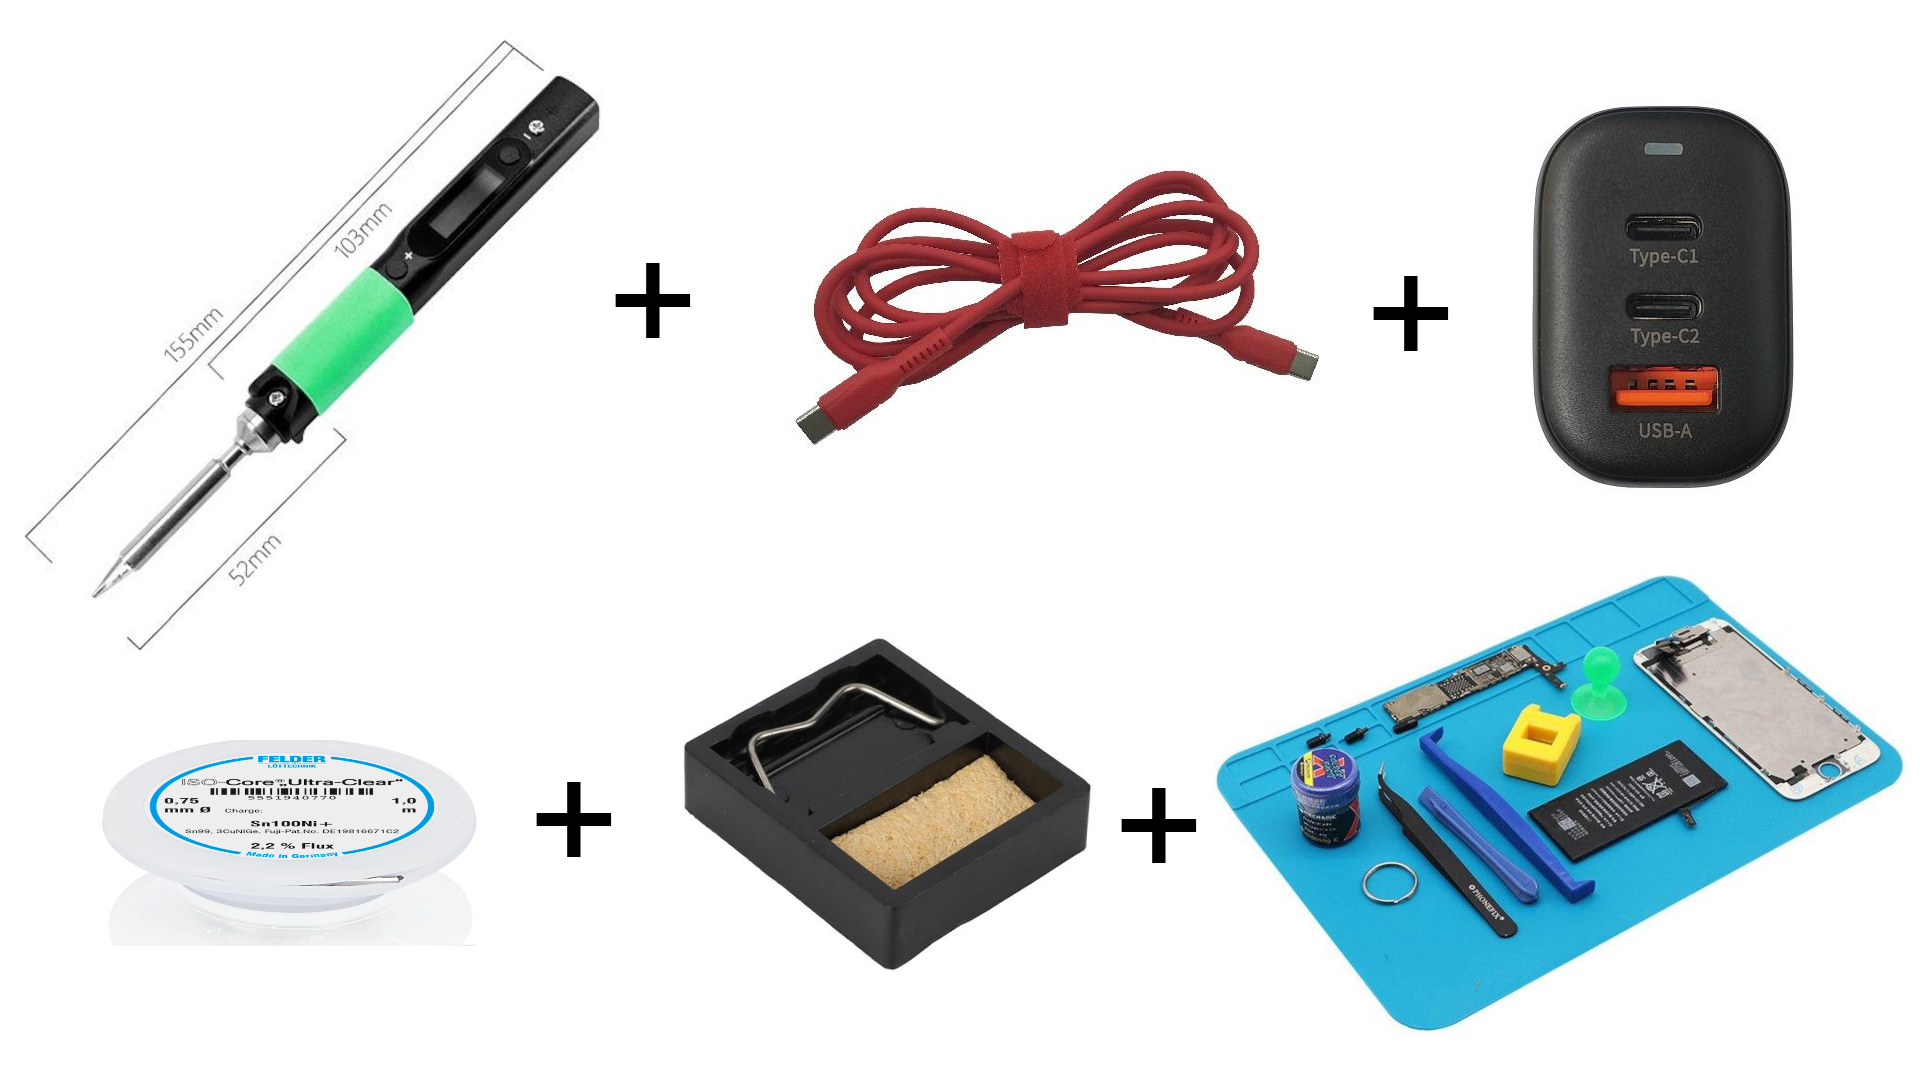 All-in-one: Pinecil v2 - complete package with everything needed for soldering